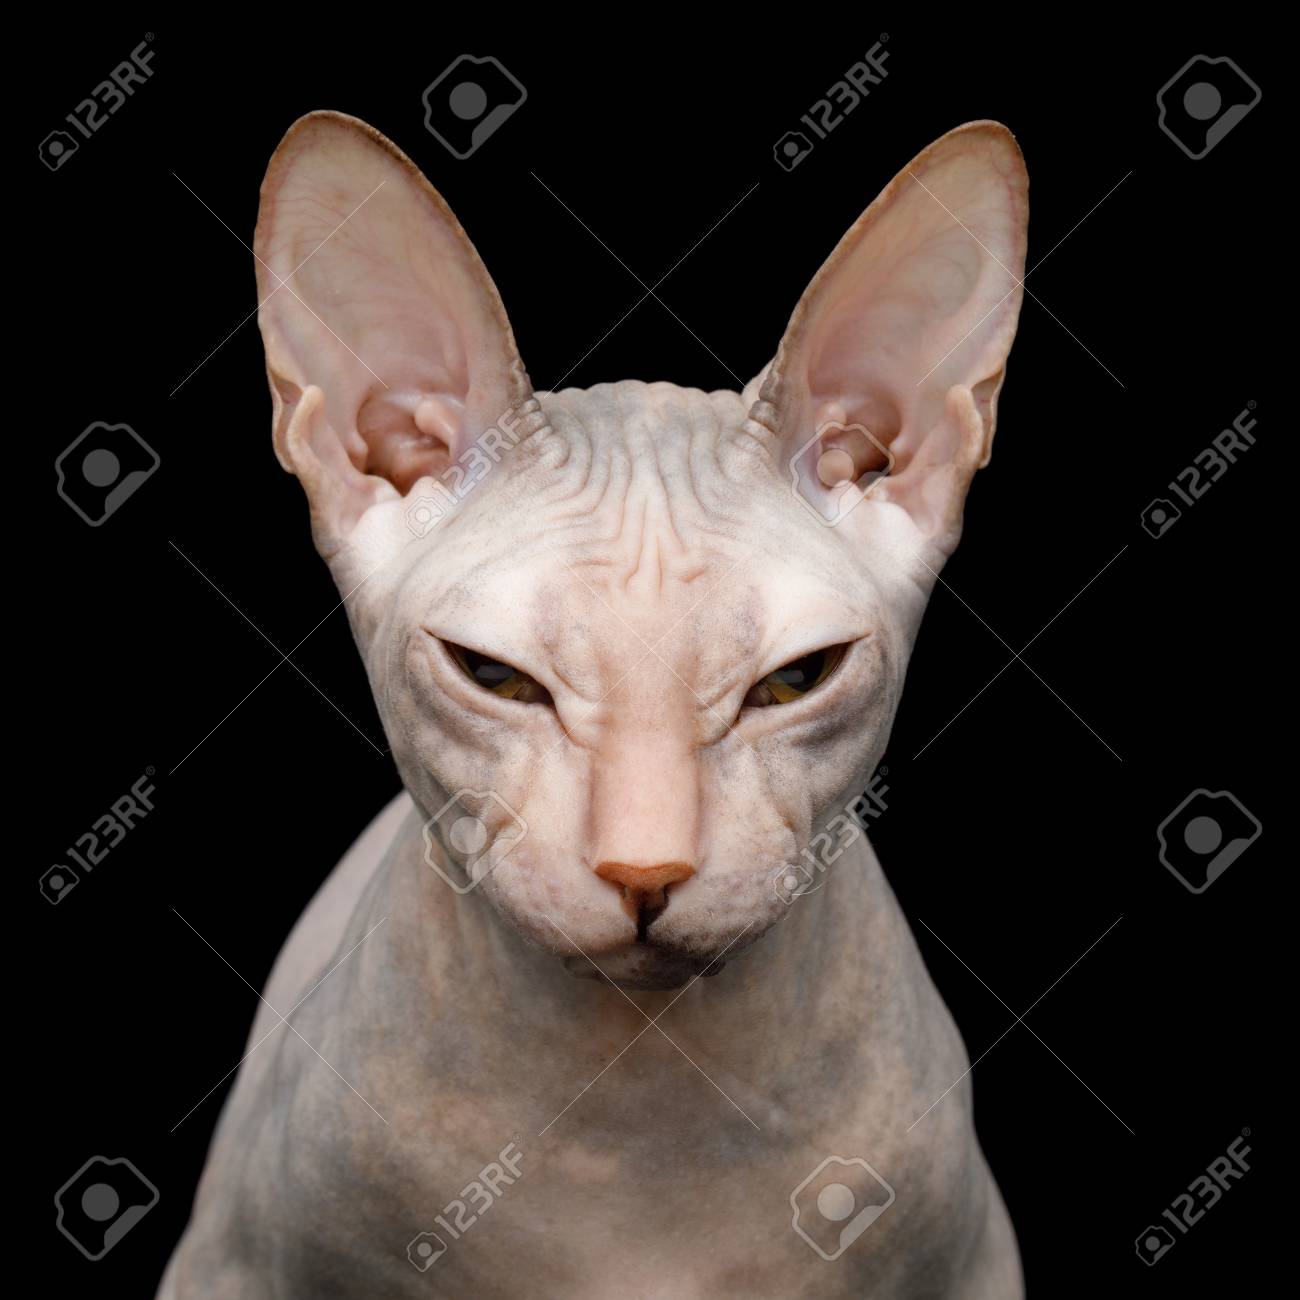 99049373-closeup-portrait-of-squints-sphynx-cat-isolated-on-black-background.jpg